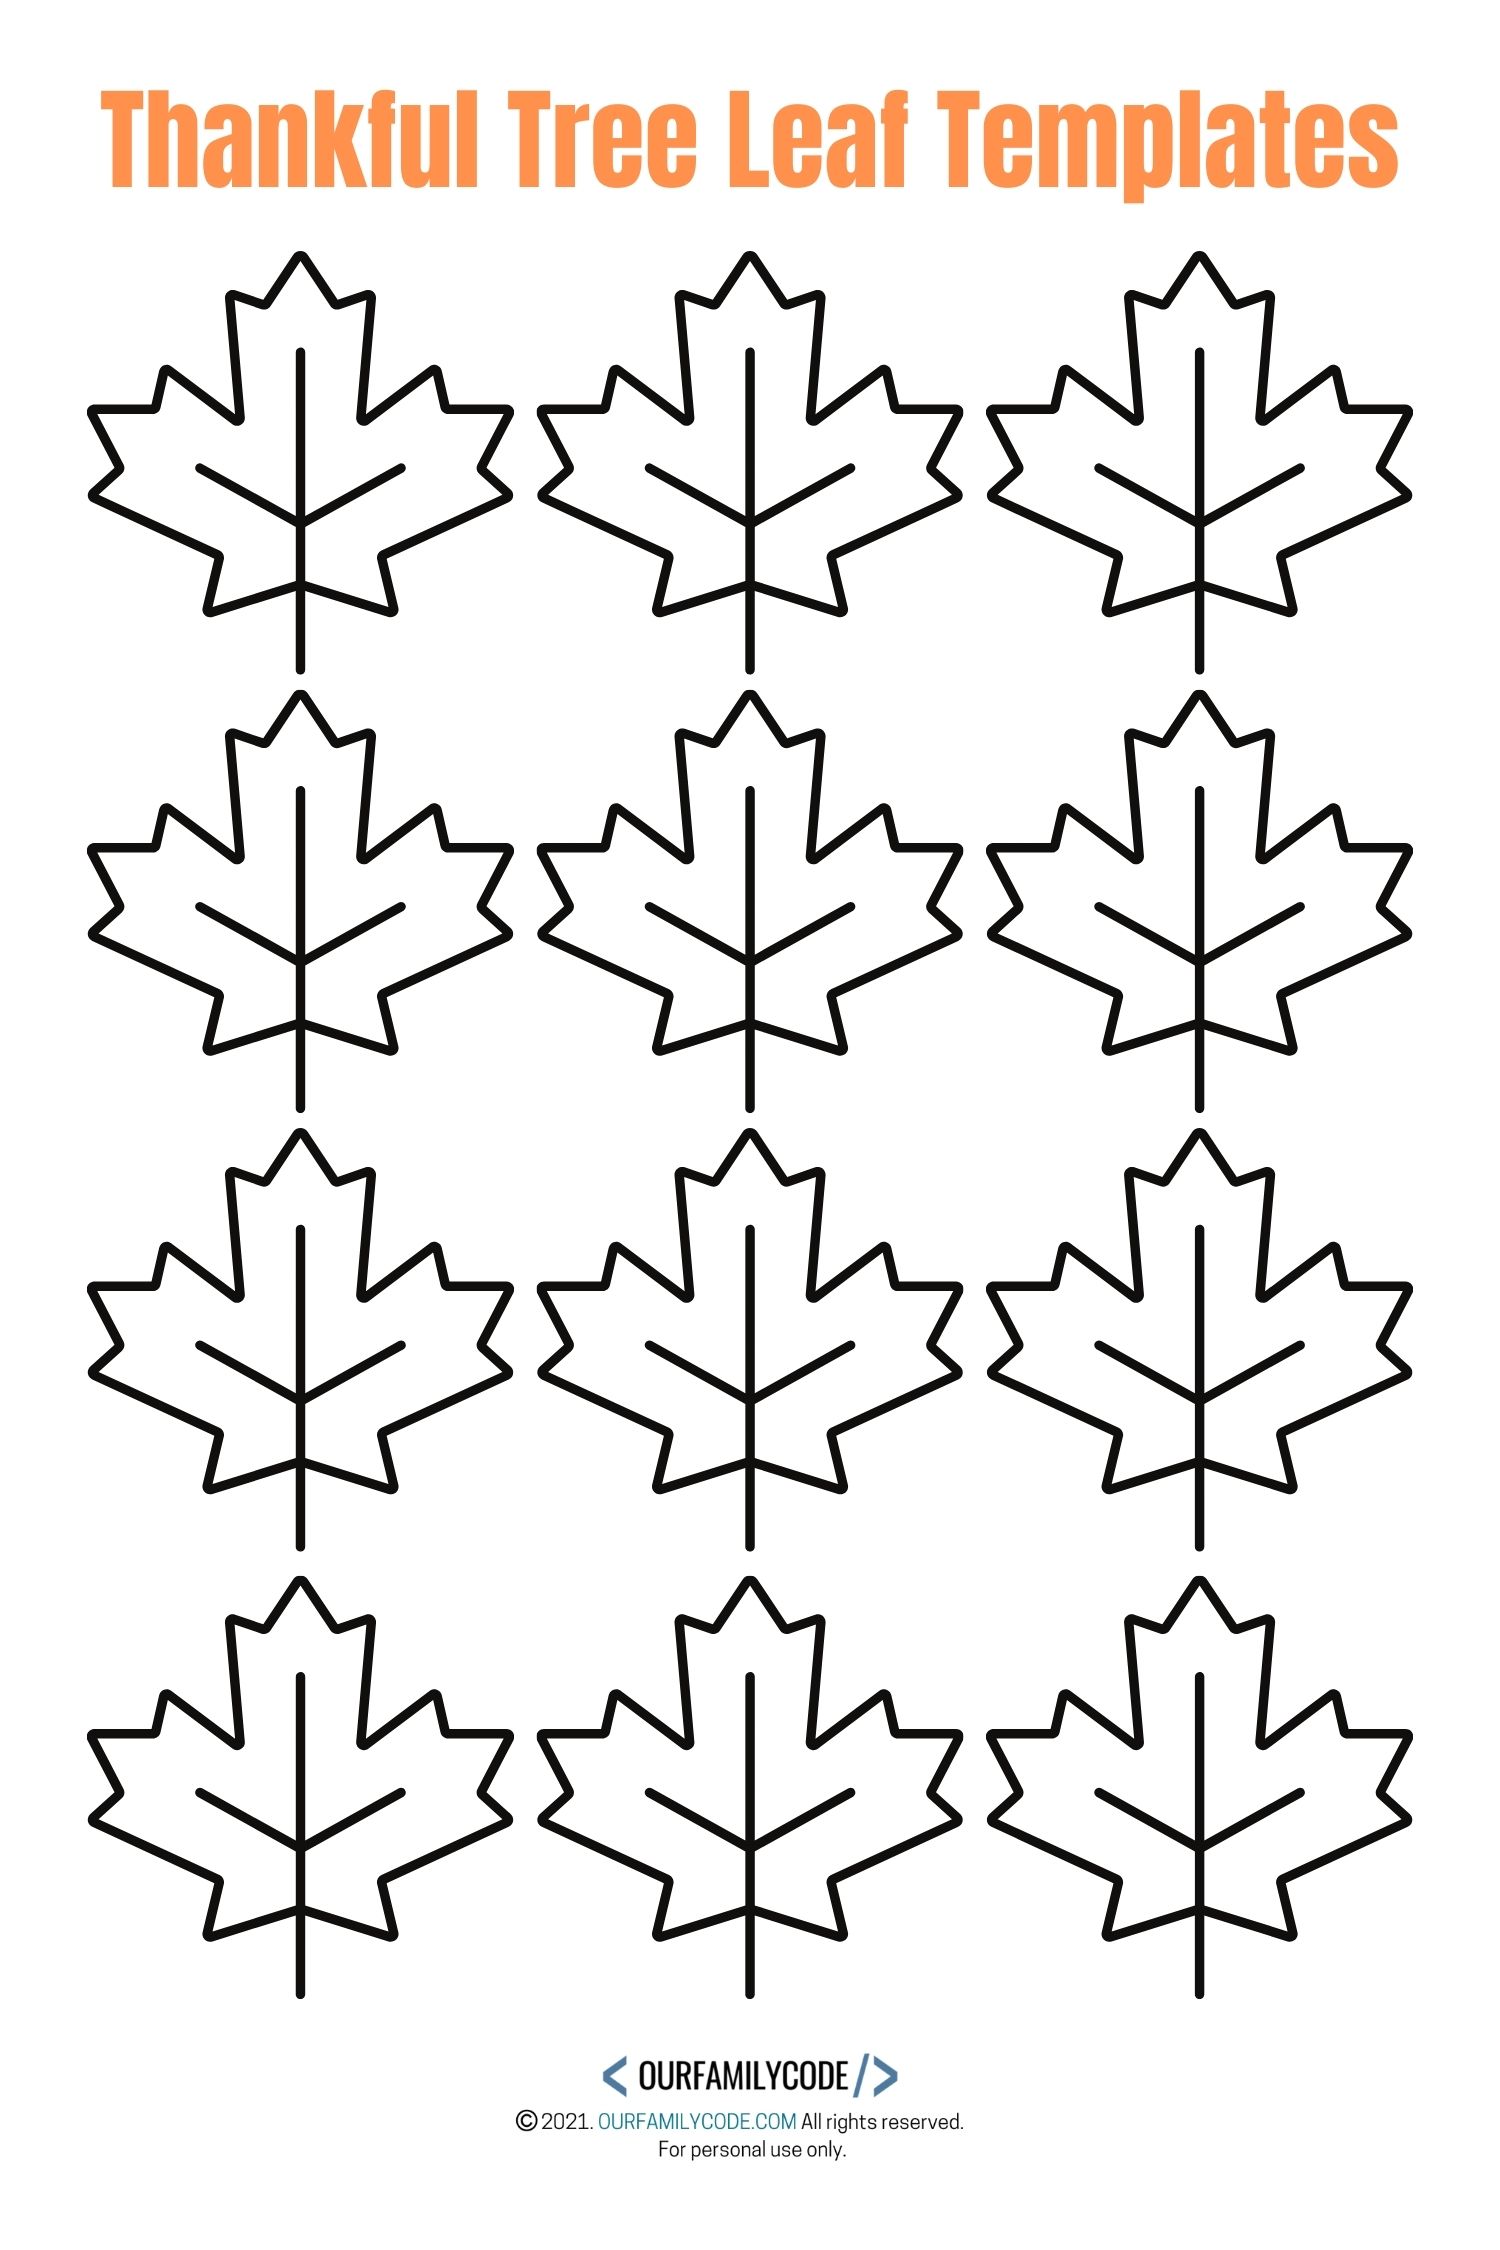 A picture of a Thankful Tree leaf template.